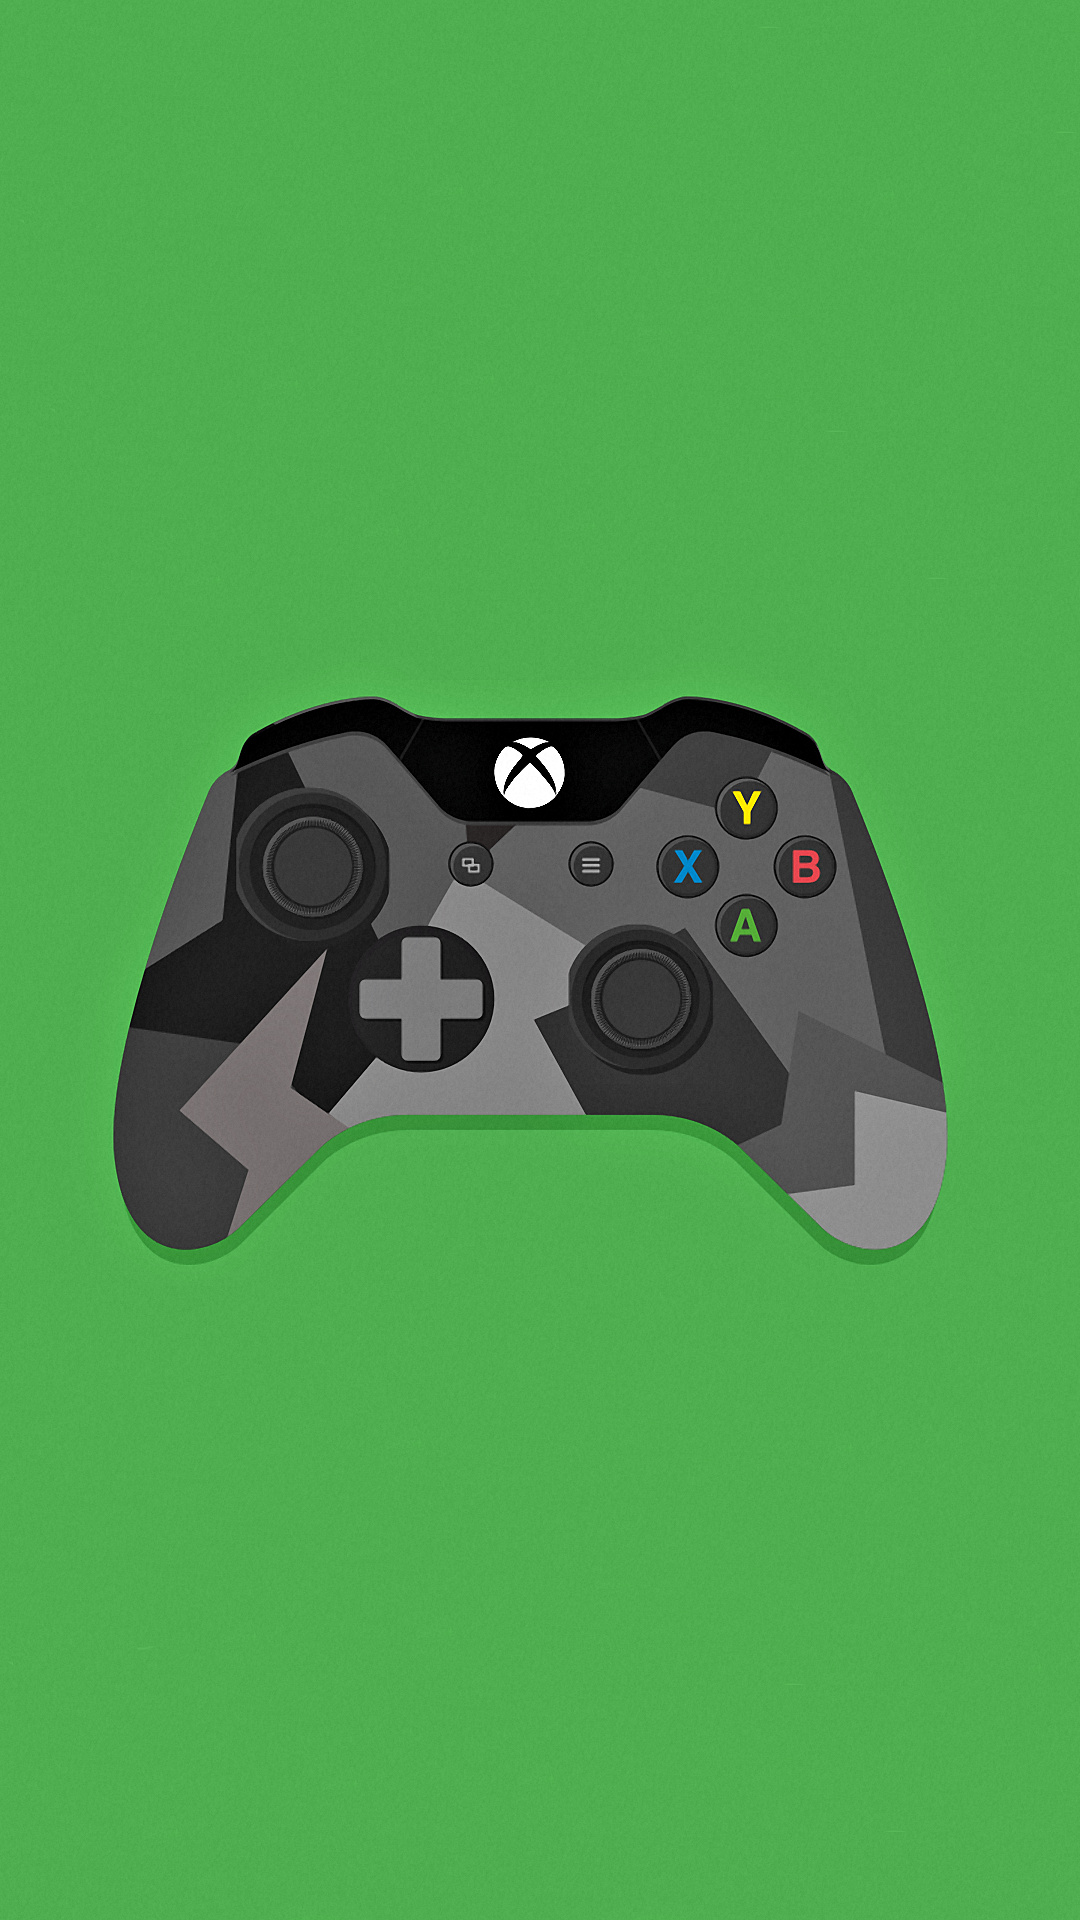 Xbox: Game controller compatible with Windows-based PCs, Illustration. 1080x1920 Full HD Background.